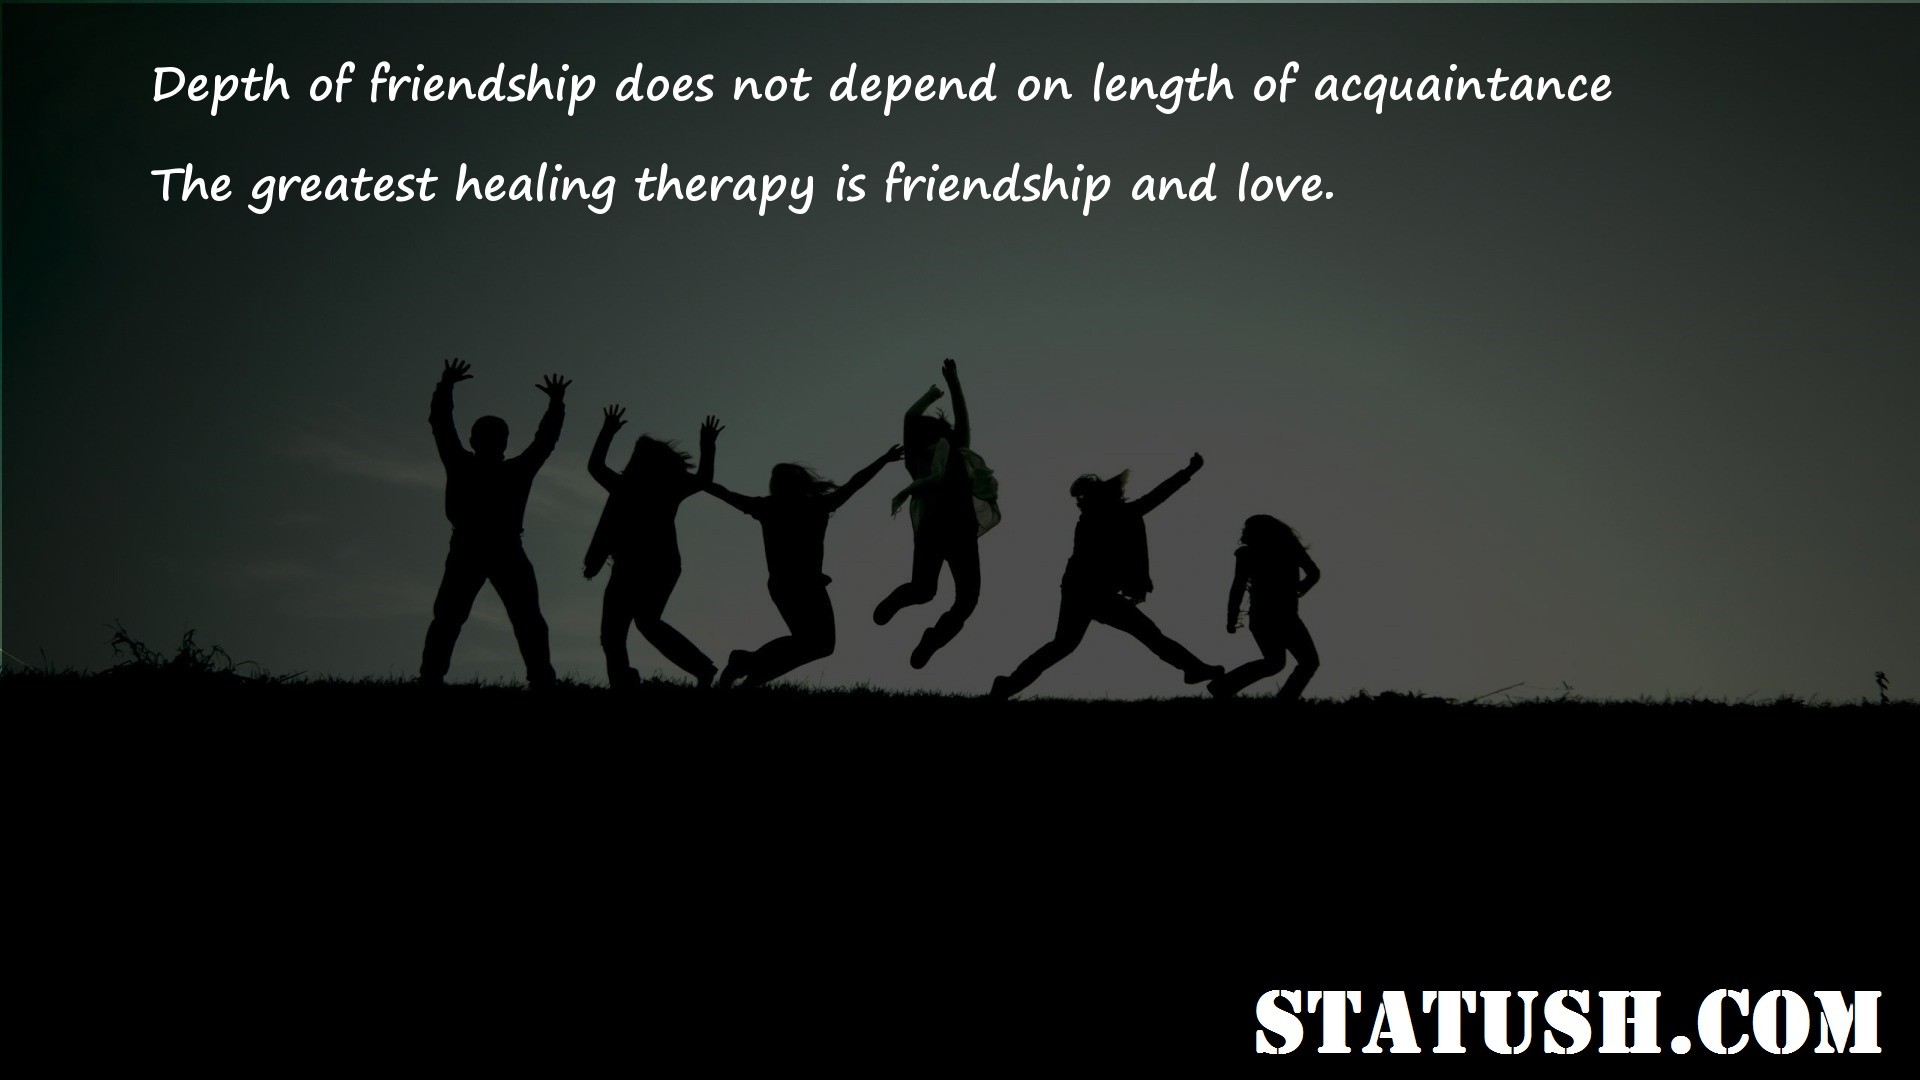 Depth of friendship does not depend on length of acquaintance - Friendship Quotes at statush.com